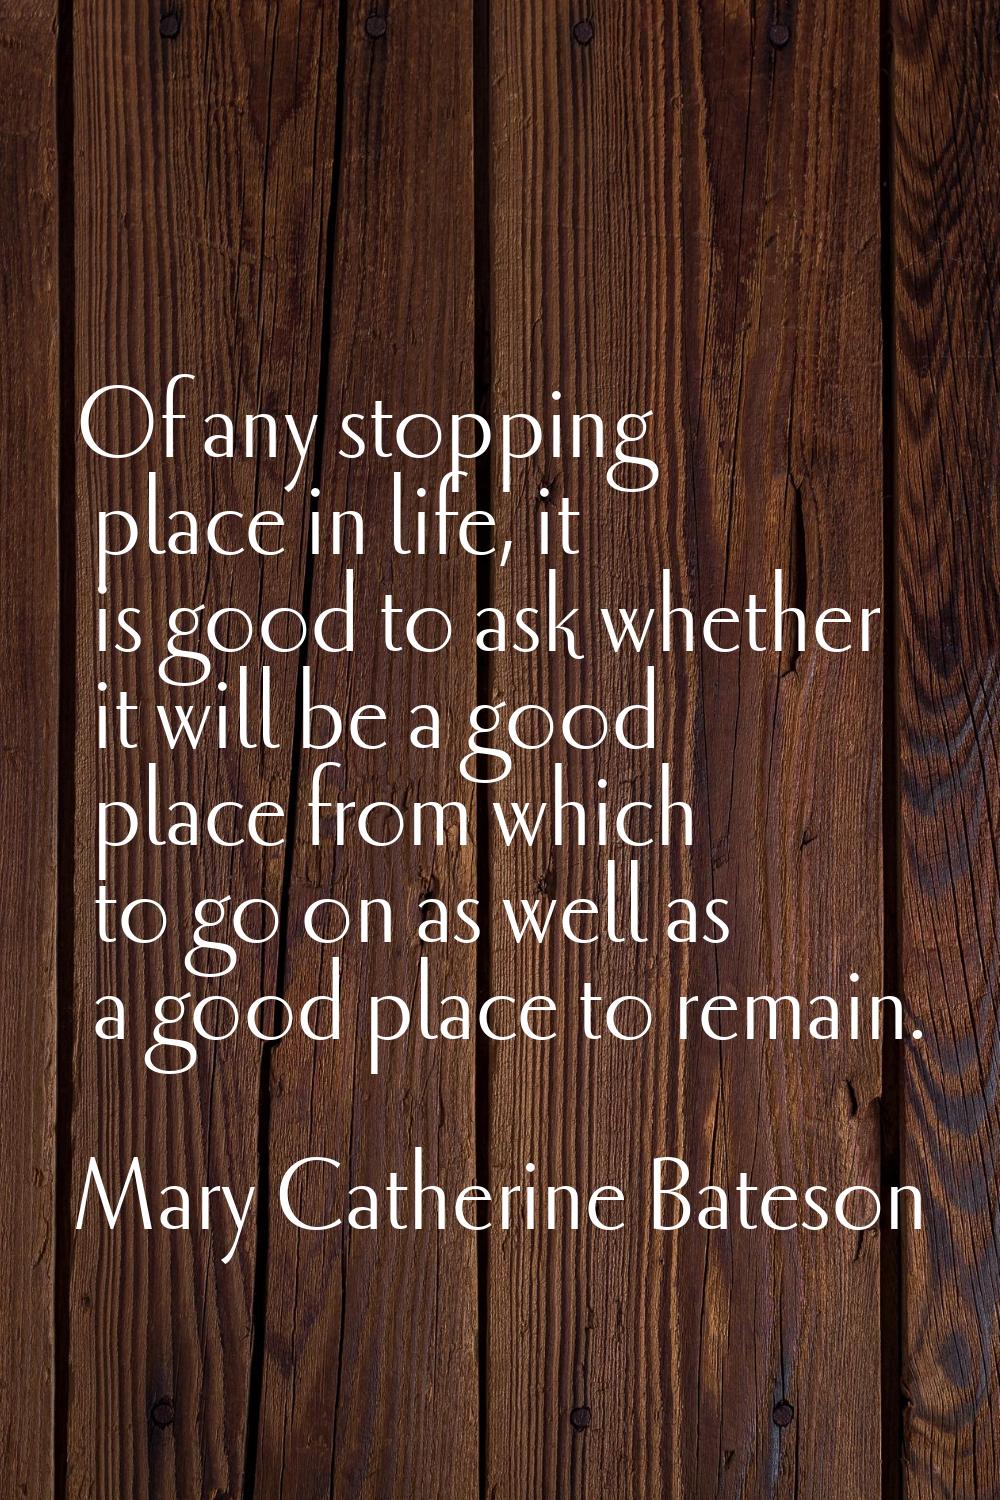 Of any stopping place in life, it is good to ask whether it will be a good place from which to go o